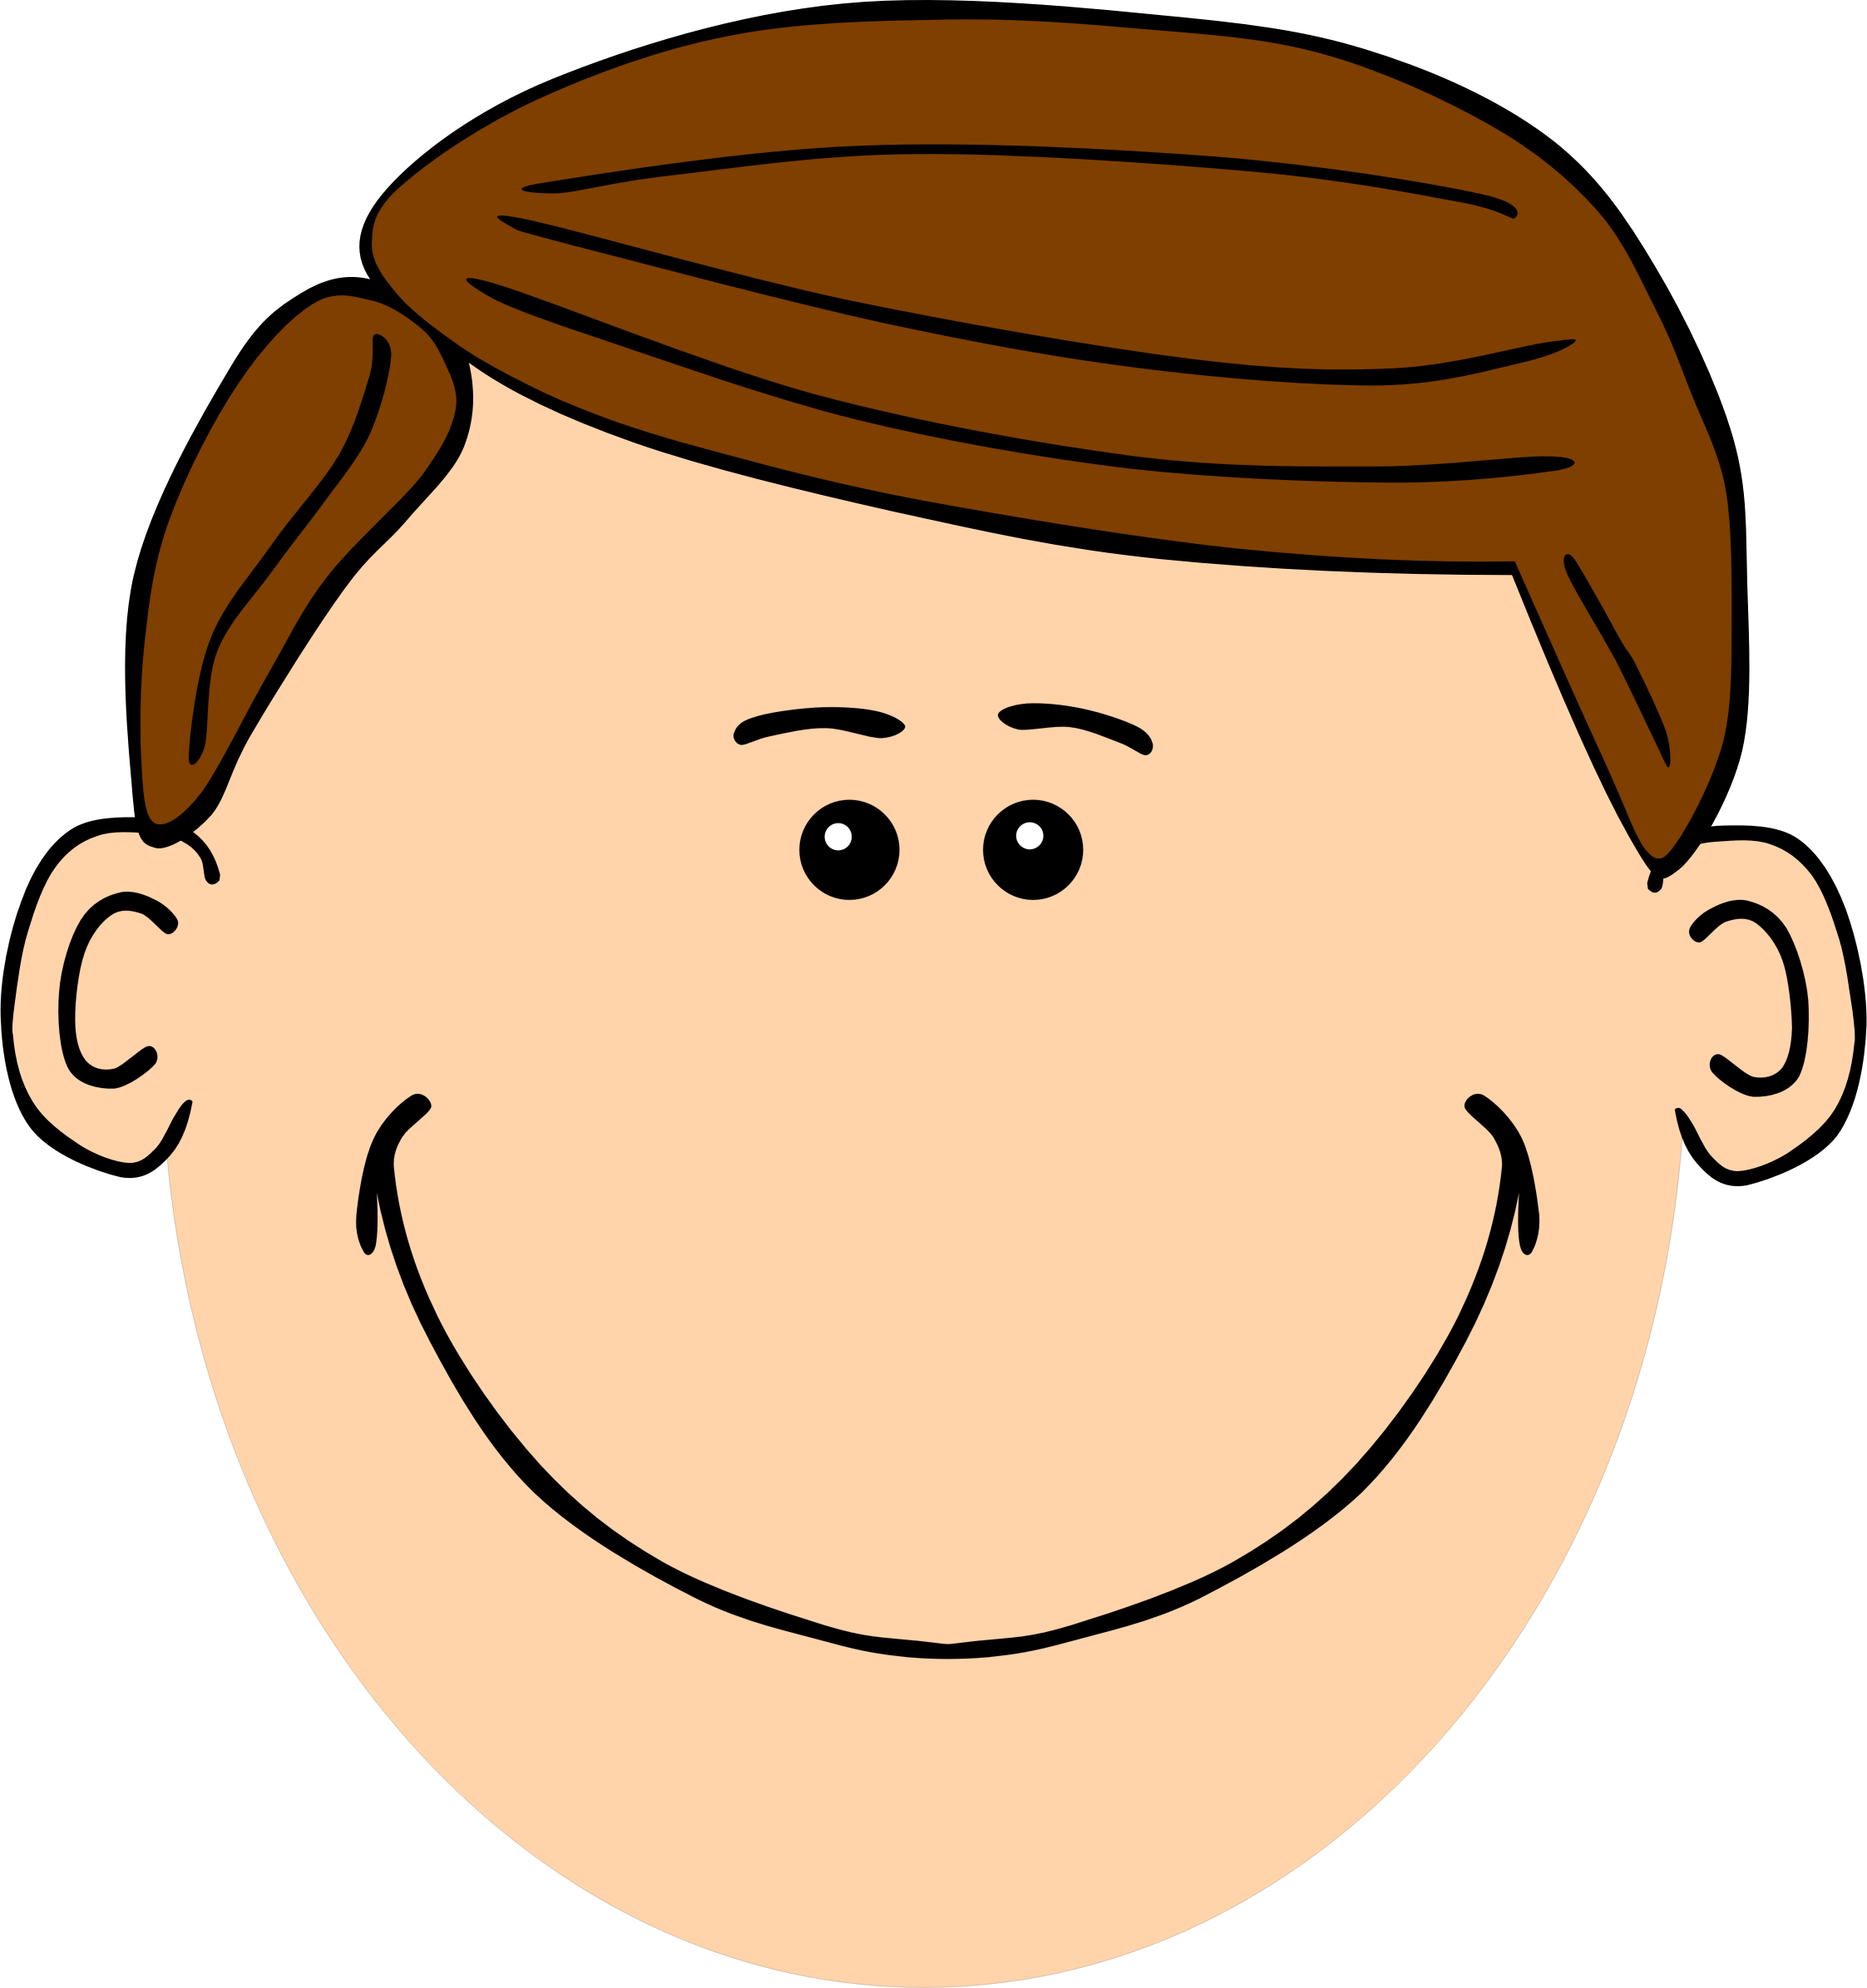 Cartoon Dad Face Clipart - Large Size Png Image - PikPng